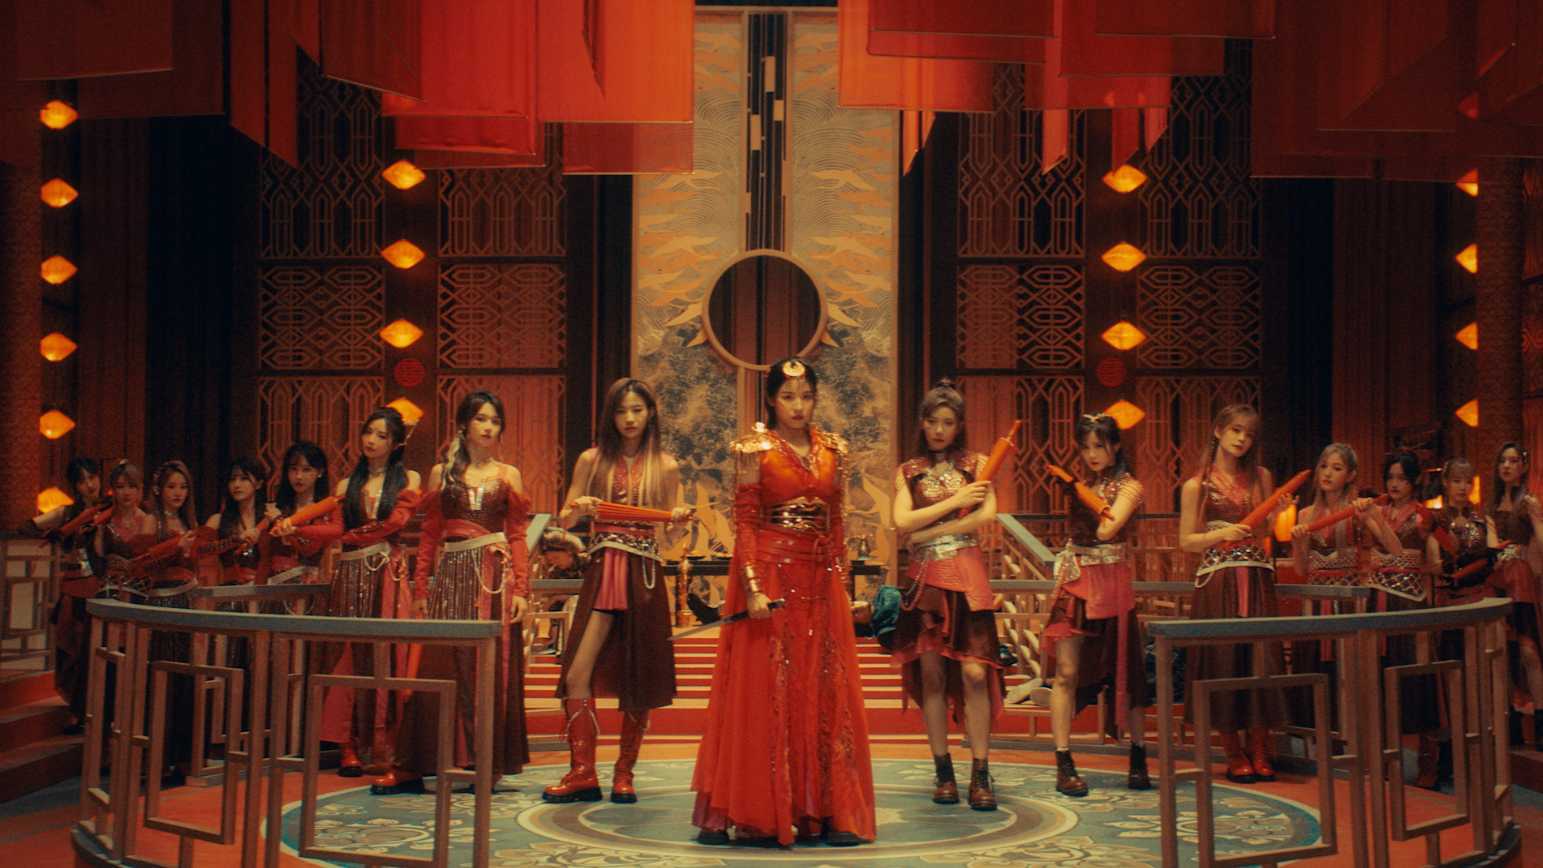 SNH48《花戎》 Official Music Video